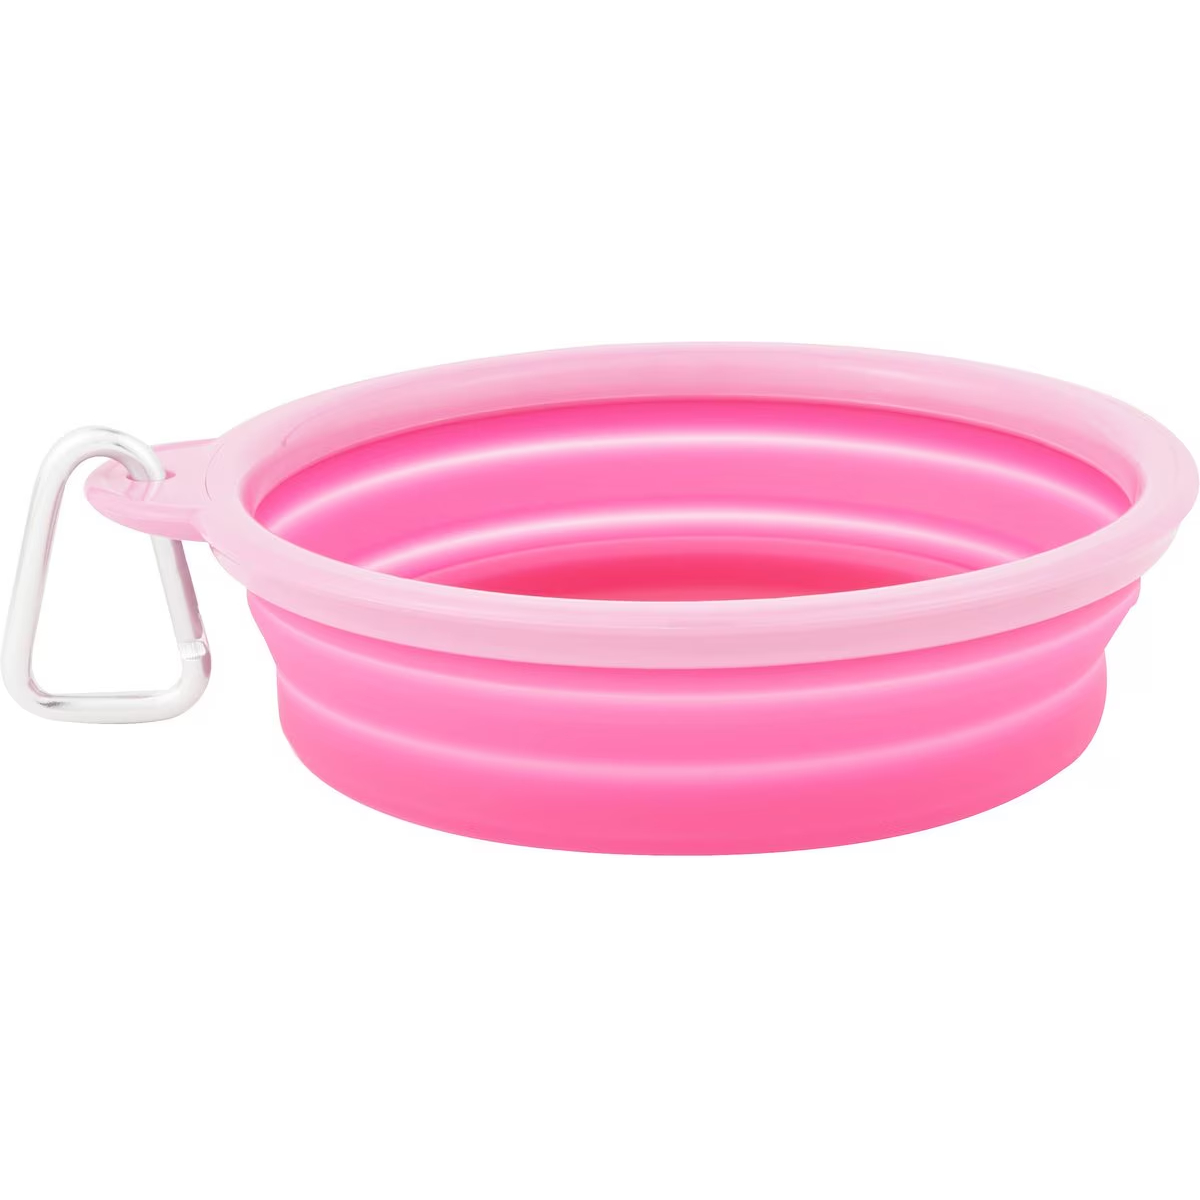 Prima Pets Collapsible Silicone Travel Dog & Cat Bowl With Carabiner